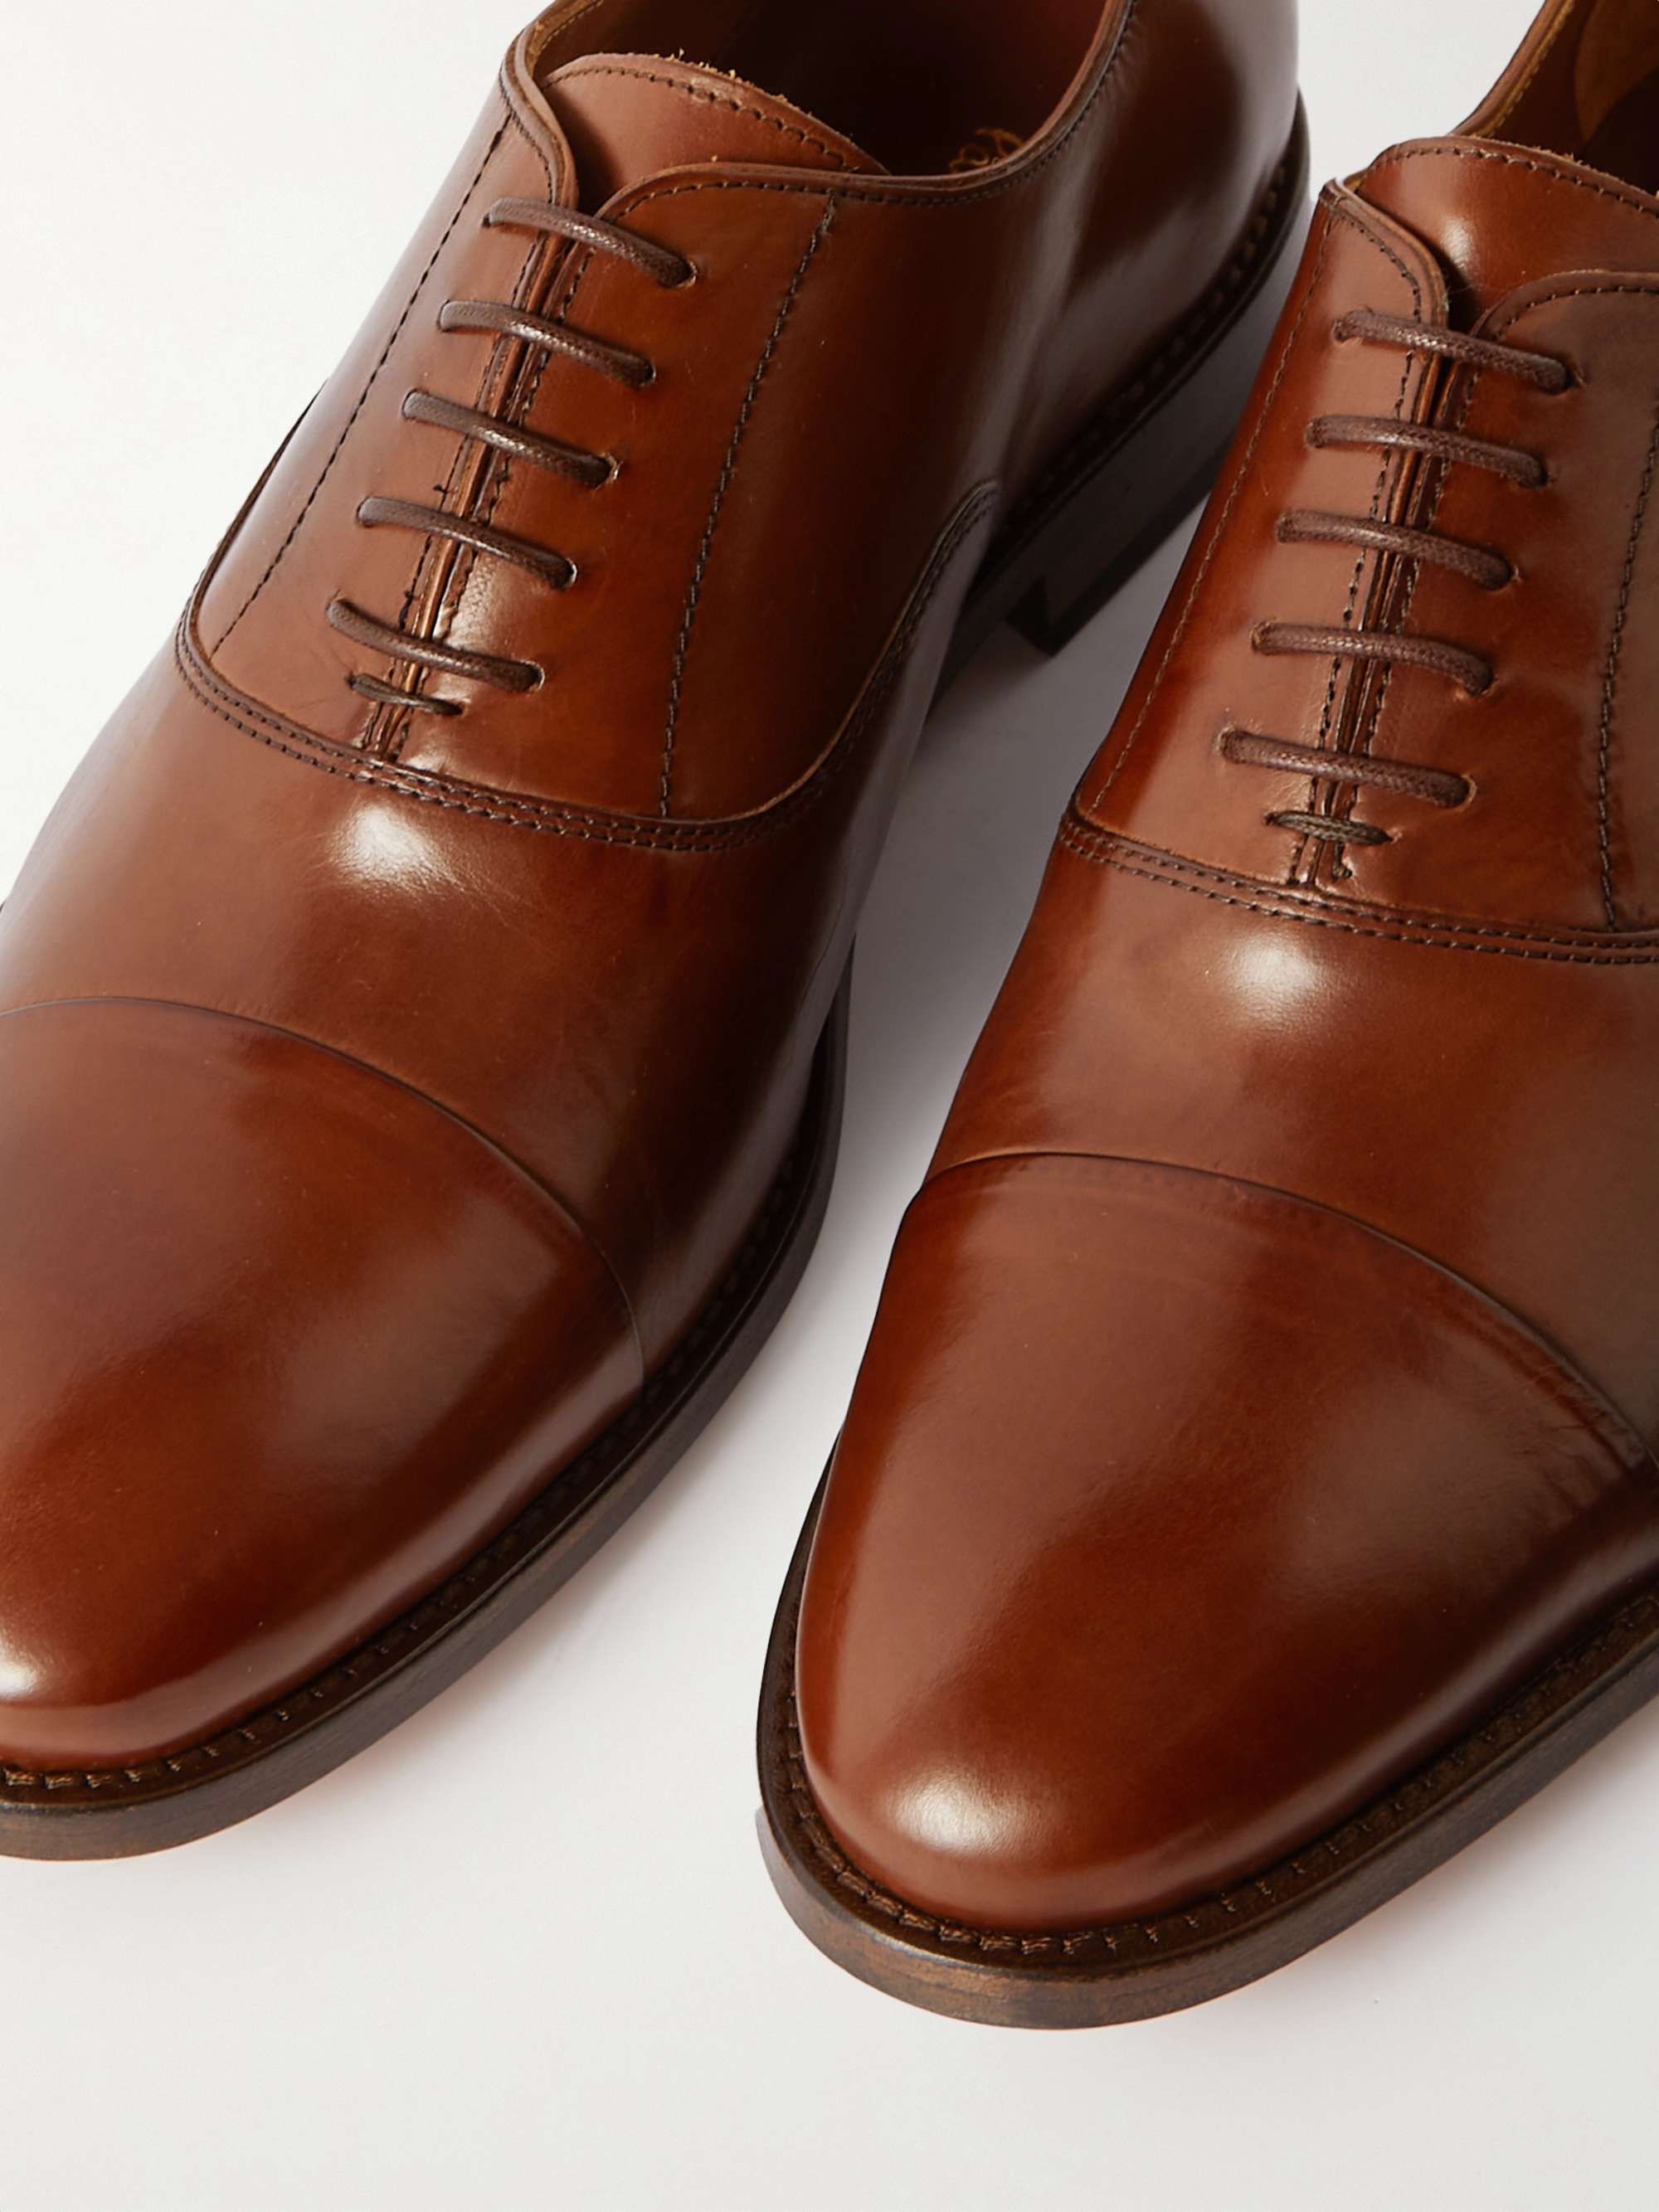 PAUL SMITH Leather Oxford Shoes | MR PORTER